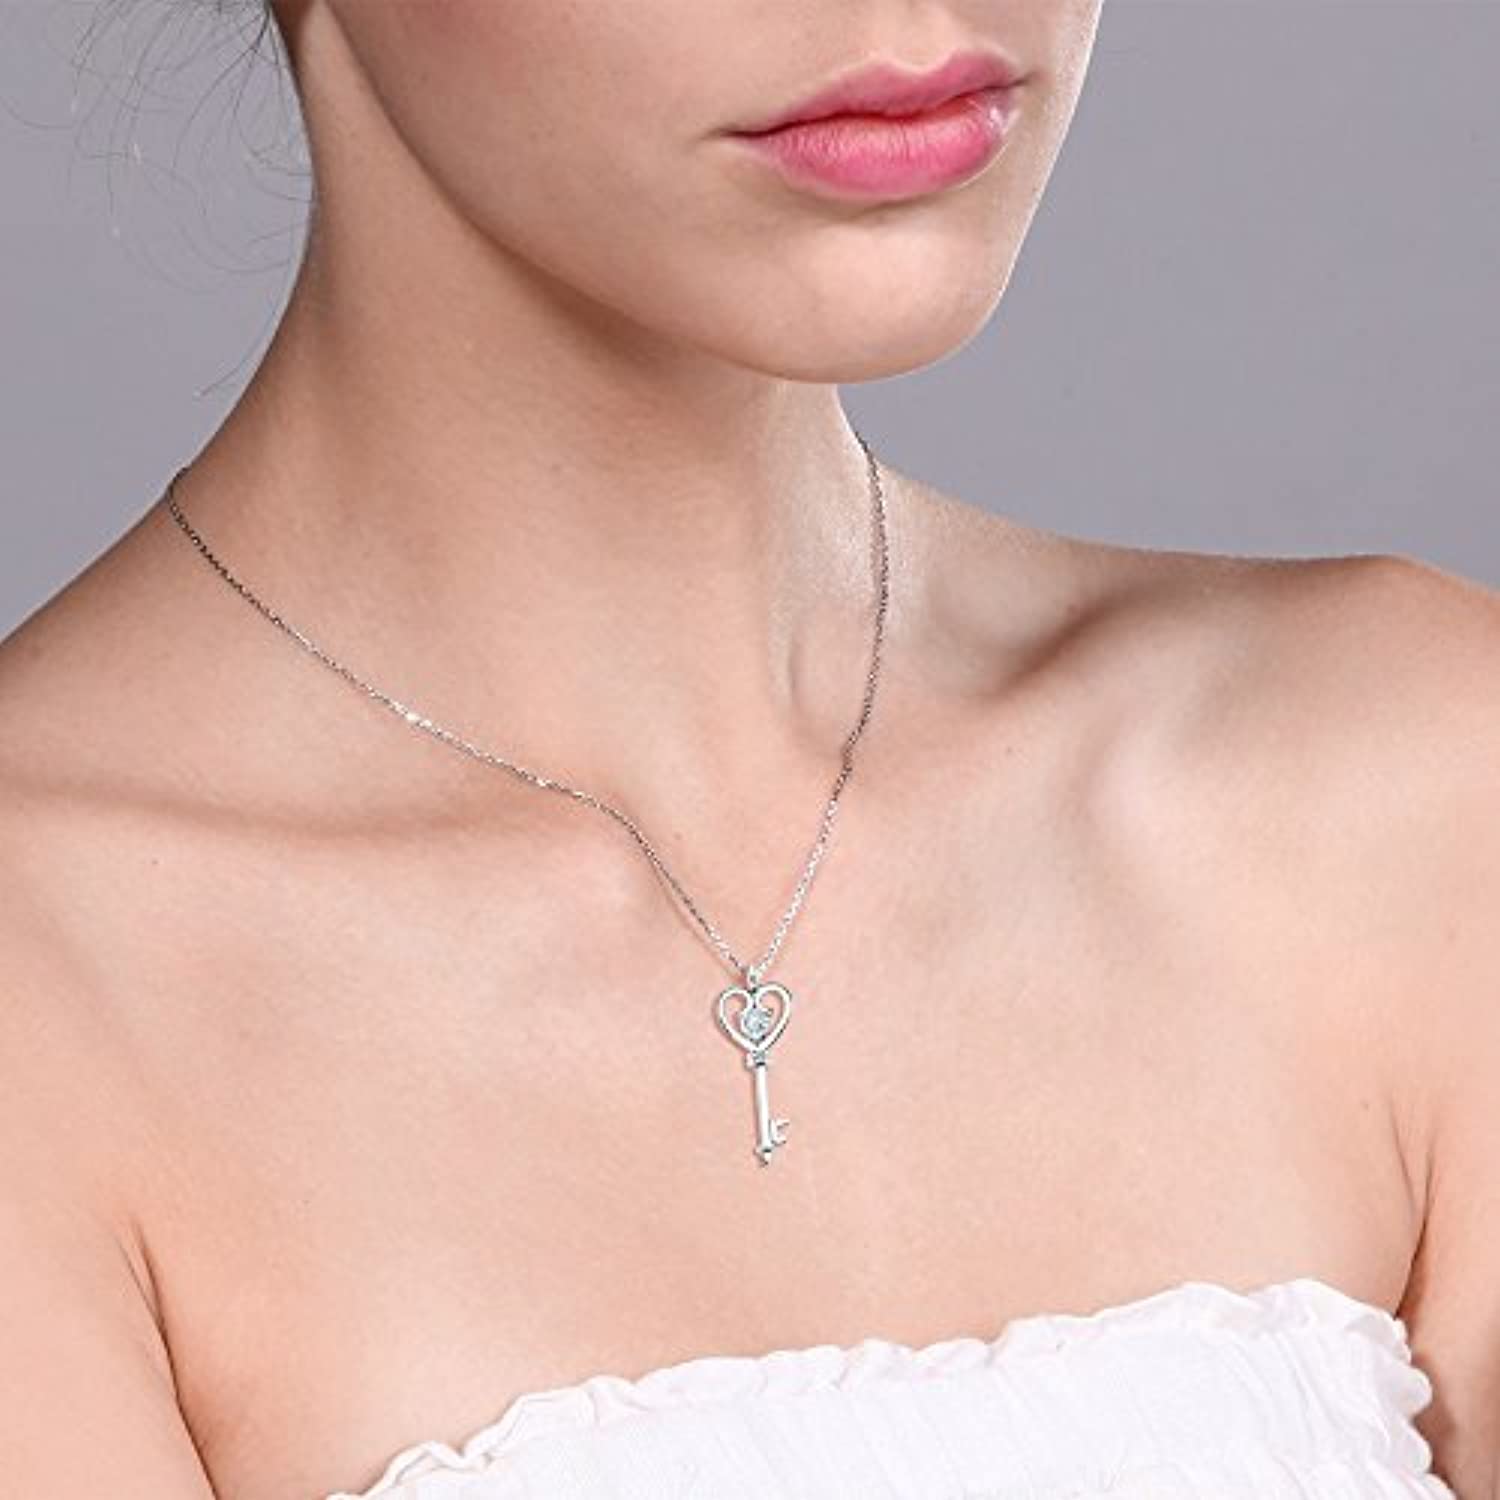 Sky Blue Aquamarine 925 Sterling Silver Gemstone Birthstone Heart Key Pendant Necklace 0.40 Ct Round Cut with 18 Inch Silver Chain